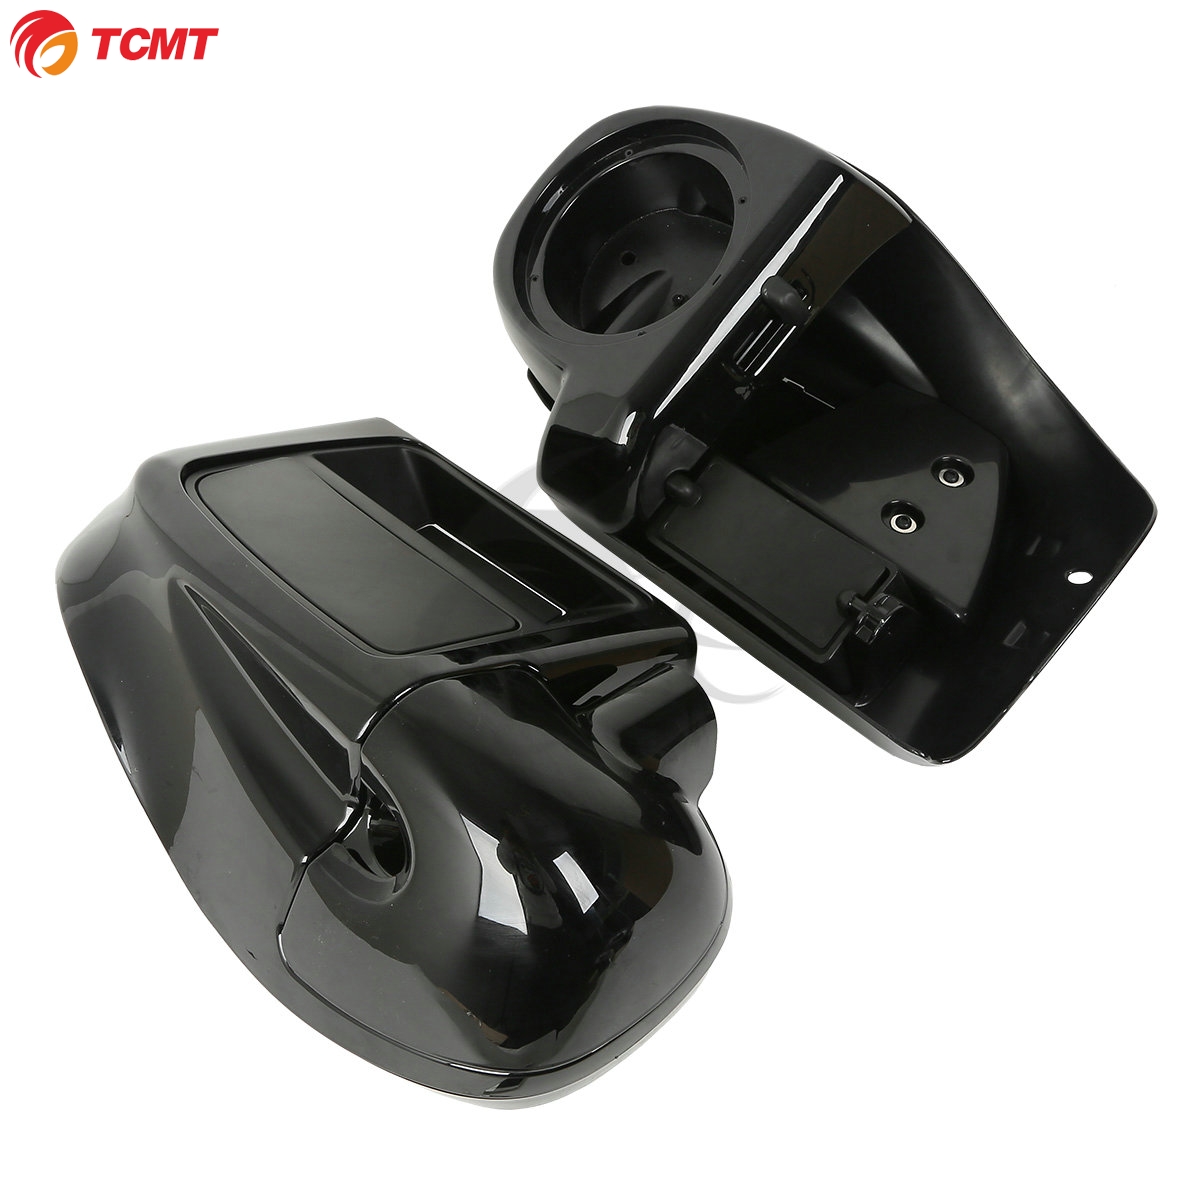 Vented Lower Fairing 6.5" Speakers Box Pods For Harley Touring Road Glide FLH 